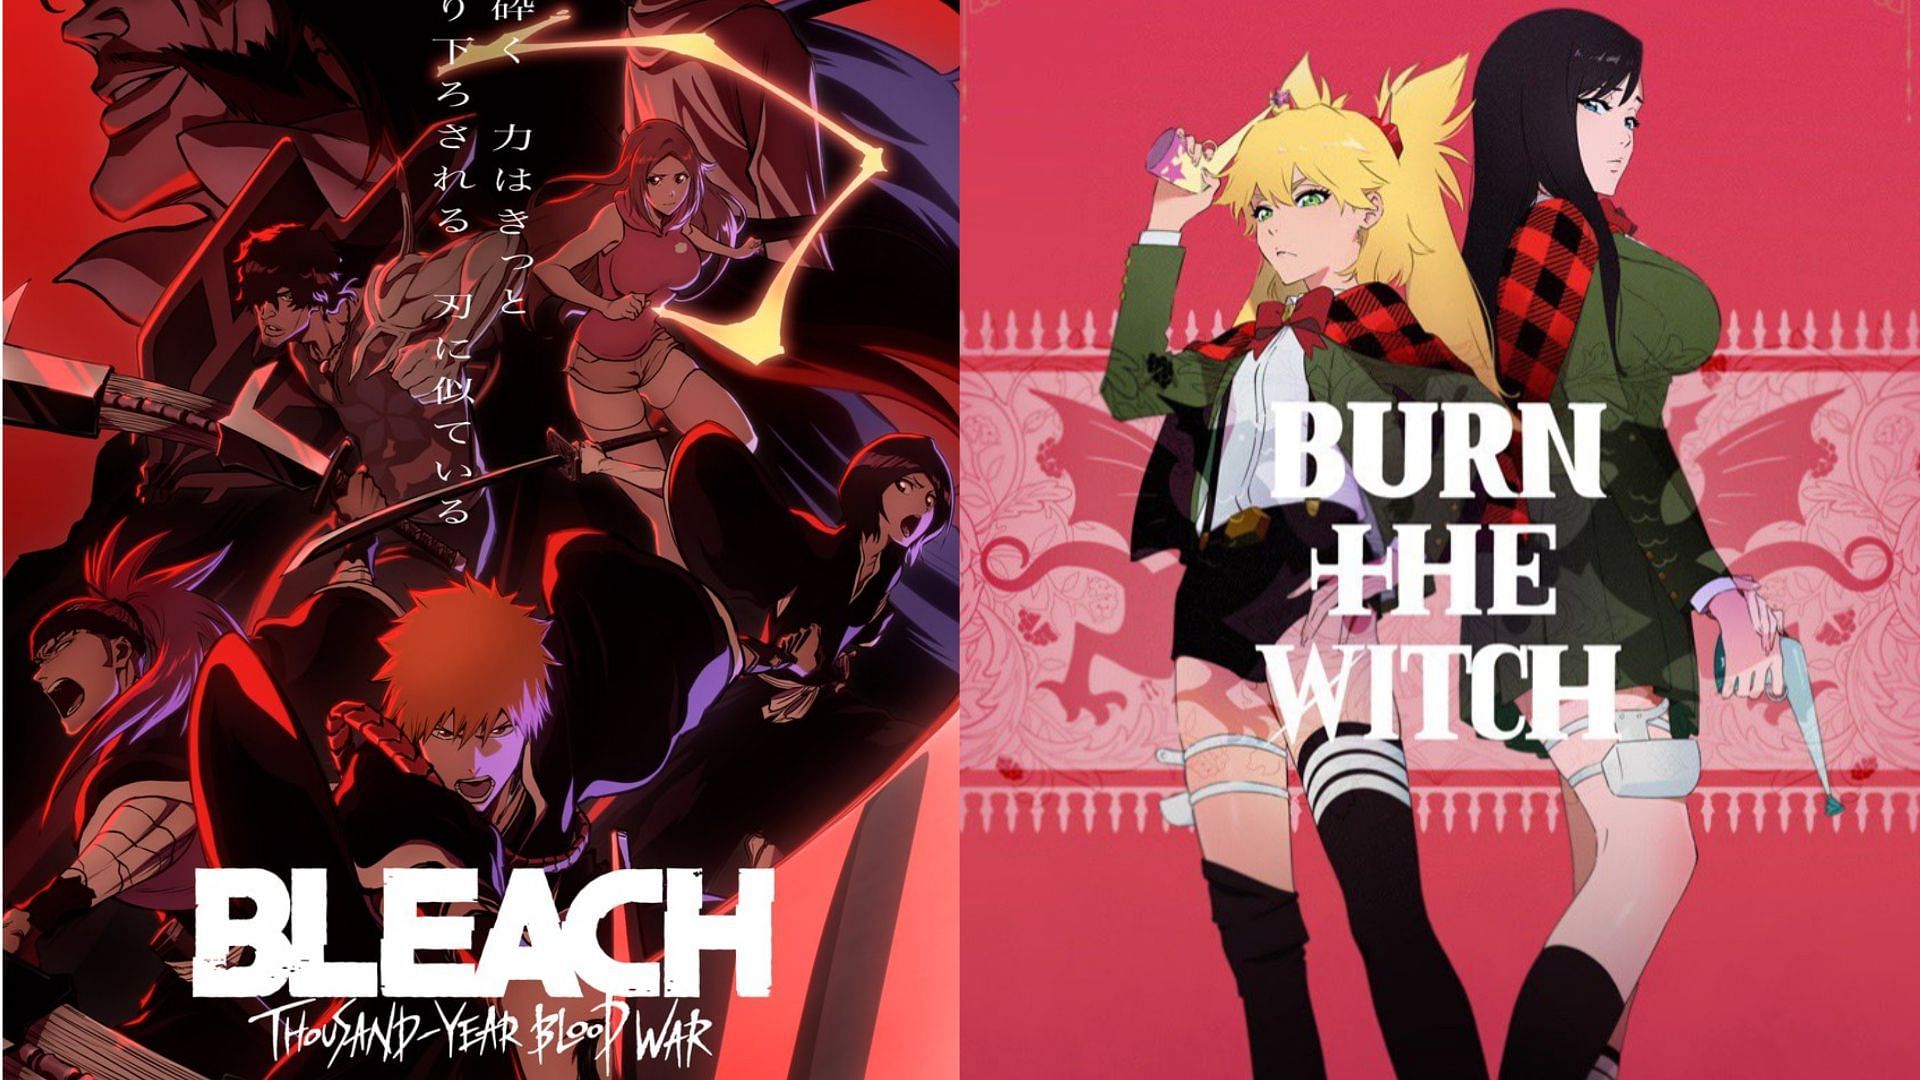 Is Tite Kubo's Burn the Witch connected to Bleach?